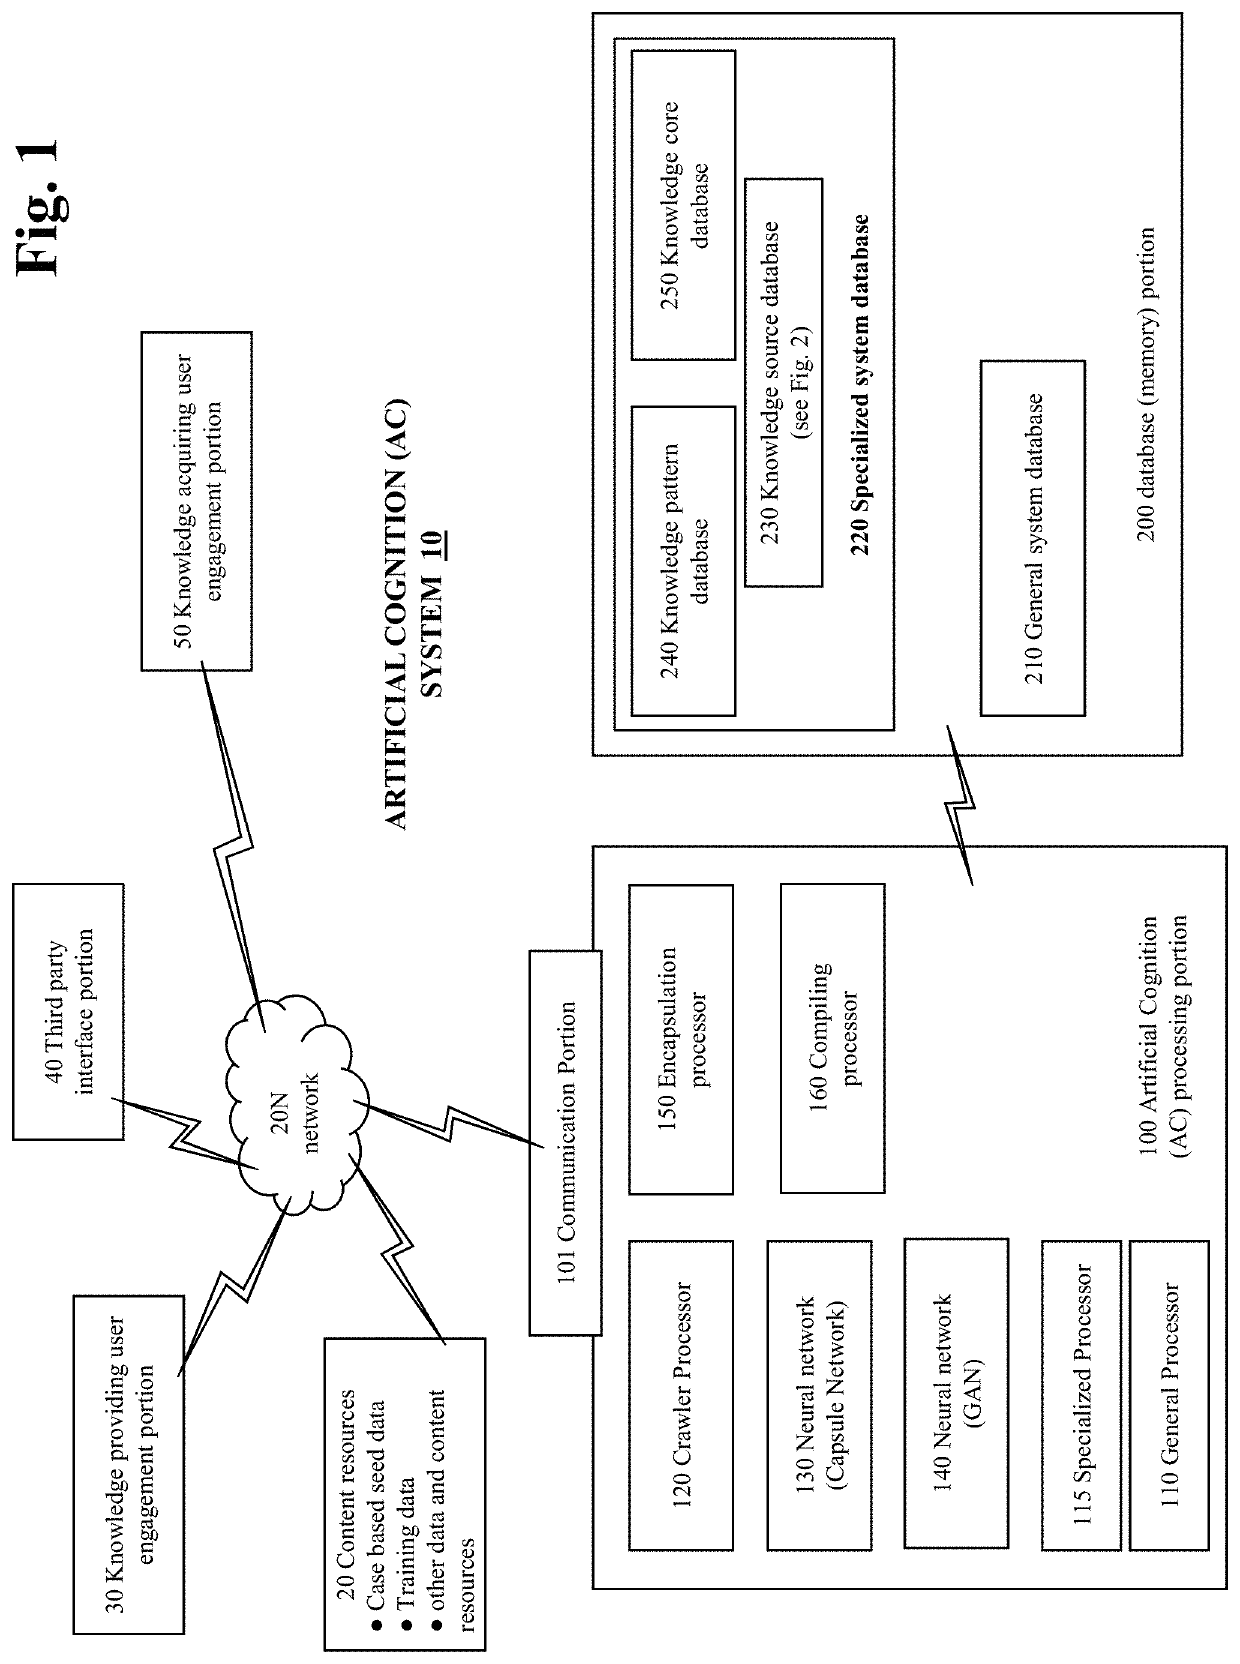 Systems and methods for processing content using a pattern language